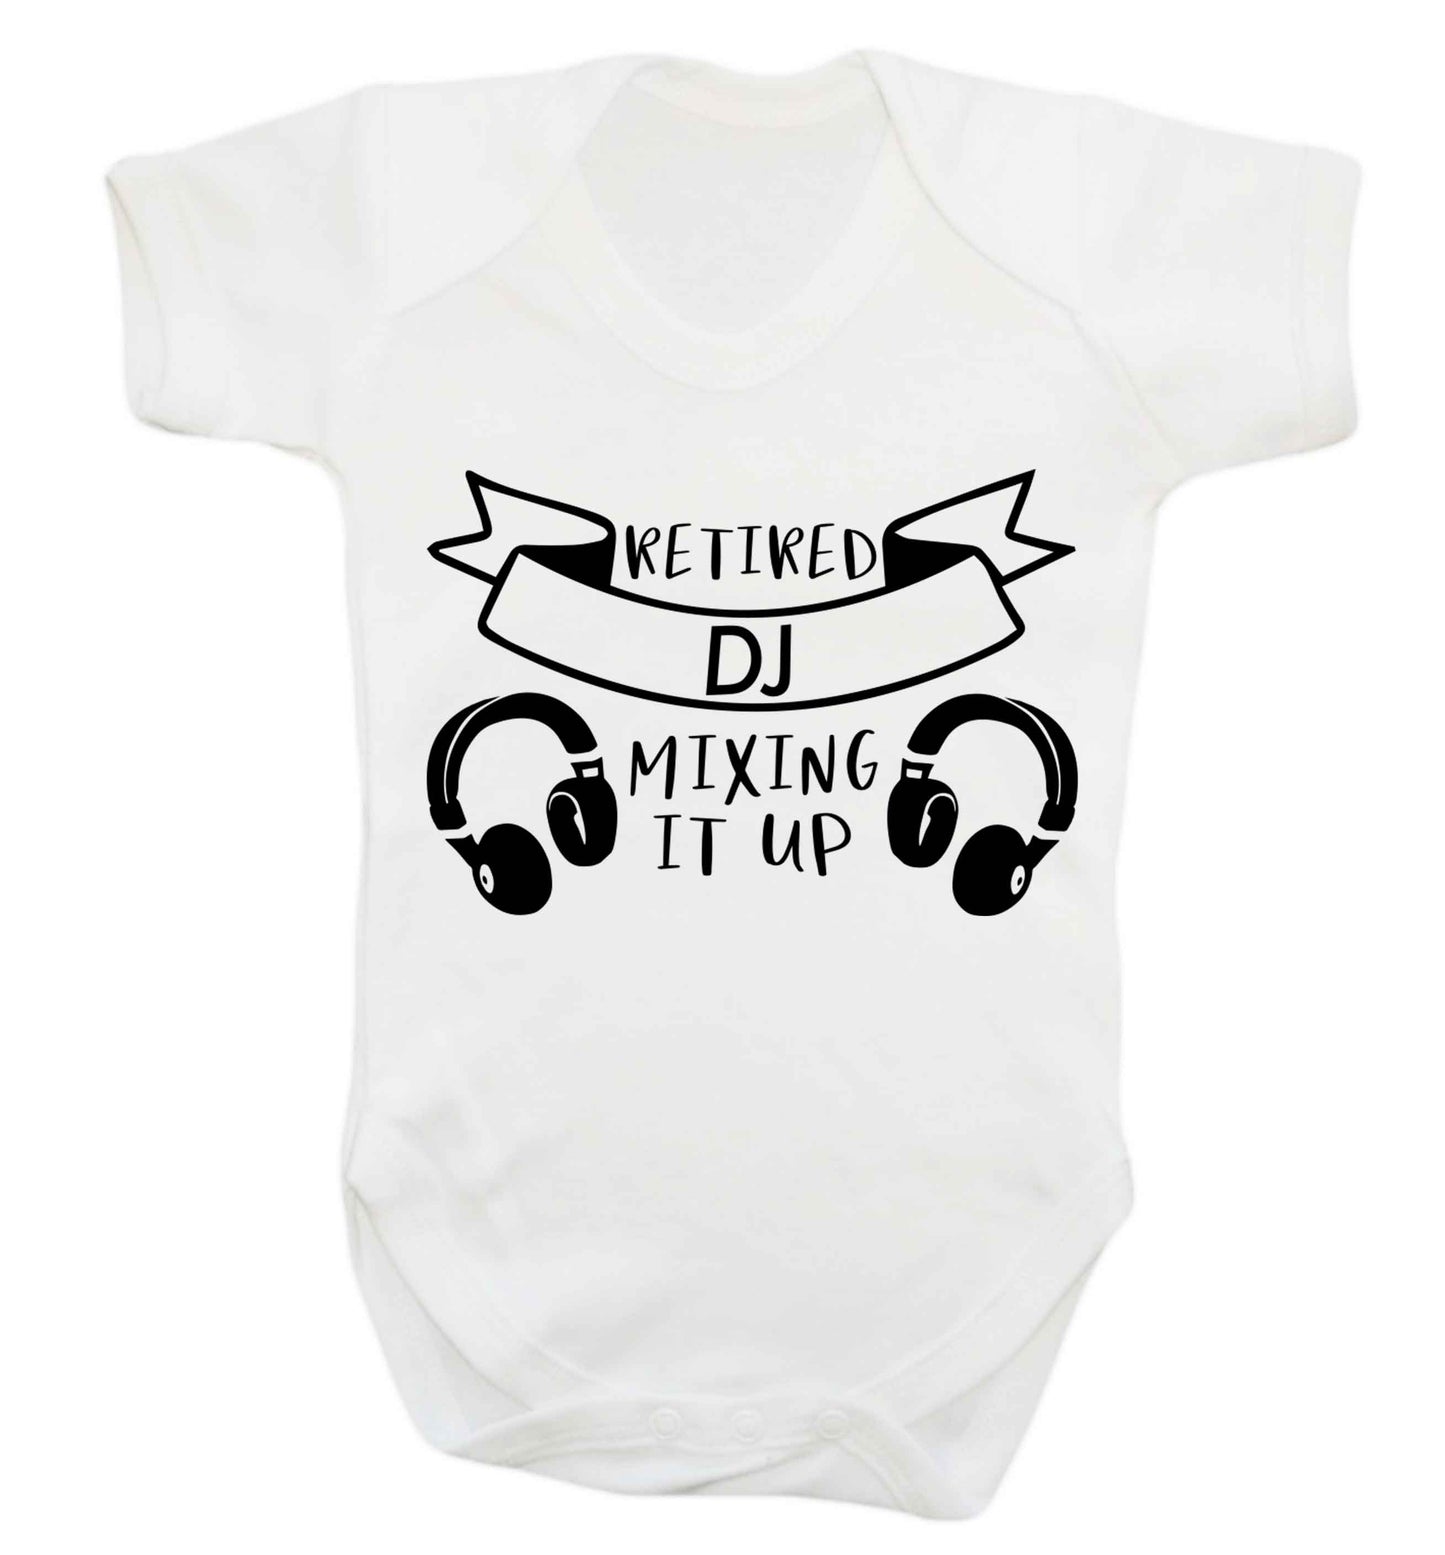 Retired DJ mixing it up Baby Vest white 18-24 months